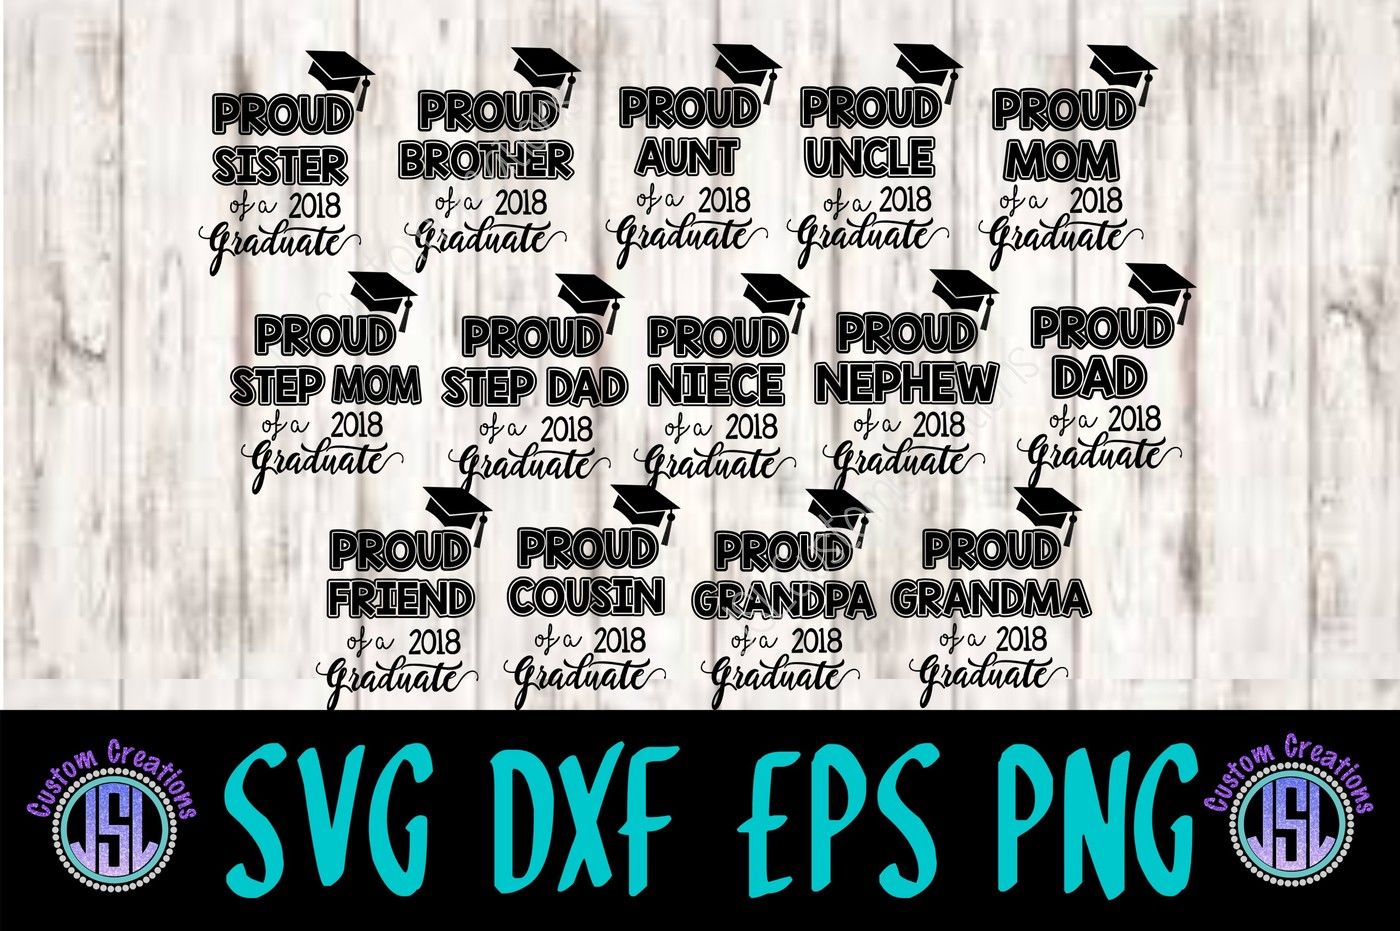 Download Proud Family Of A 2018 Graduate Set Of 14 Bundle Svg Dxf Eps Png By Jslcustomcreations Thehungryjpeg Com